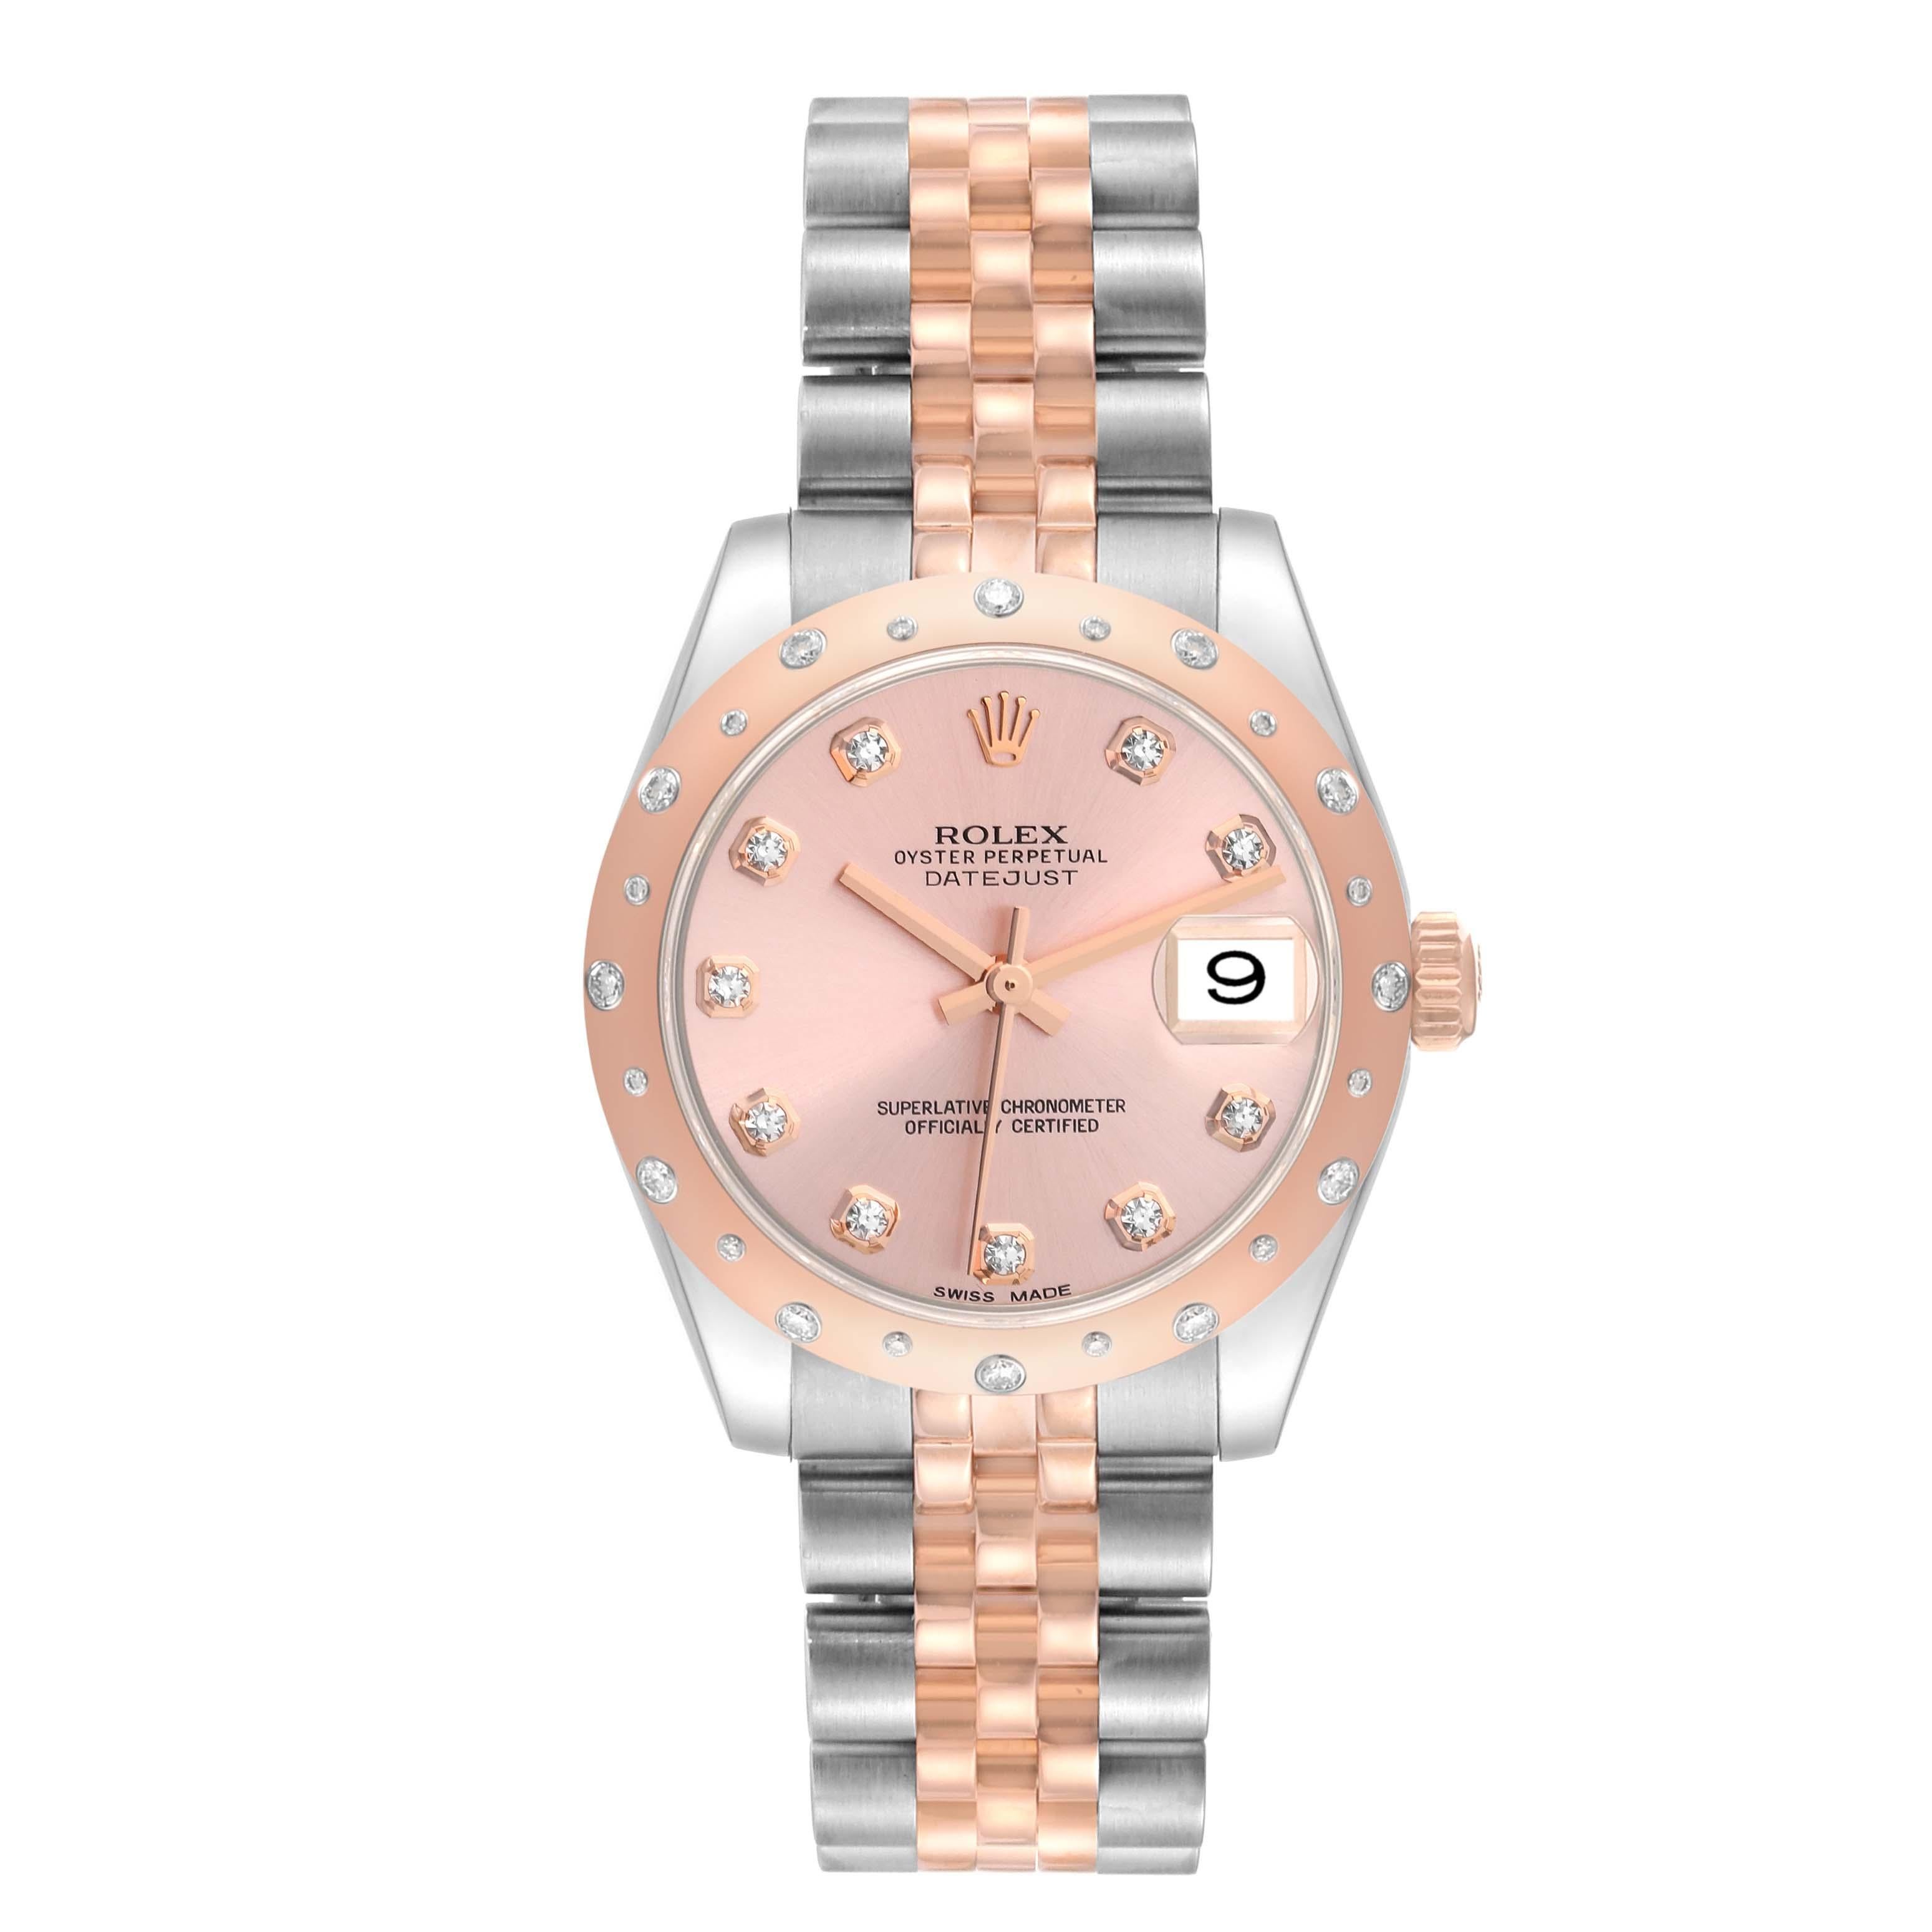 Rolex Datejust Midsize Steel Rose Gold Diamond Ladies Watch 178341. Officially certified chronometer automatic self-winding movement with quickset date function. Stainless steel and 18K rose gold oyster case 31 mm in diameter. Rolex logo on a crown.